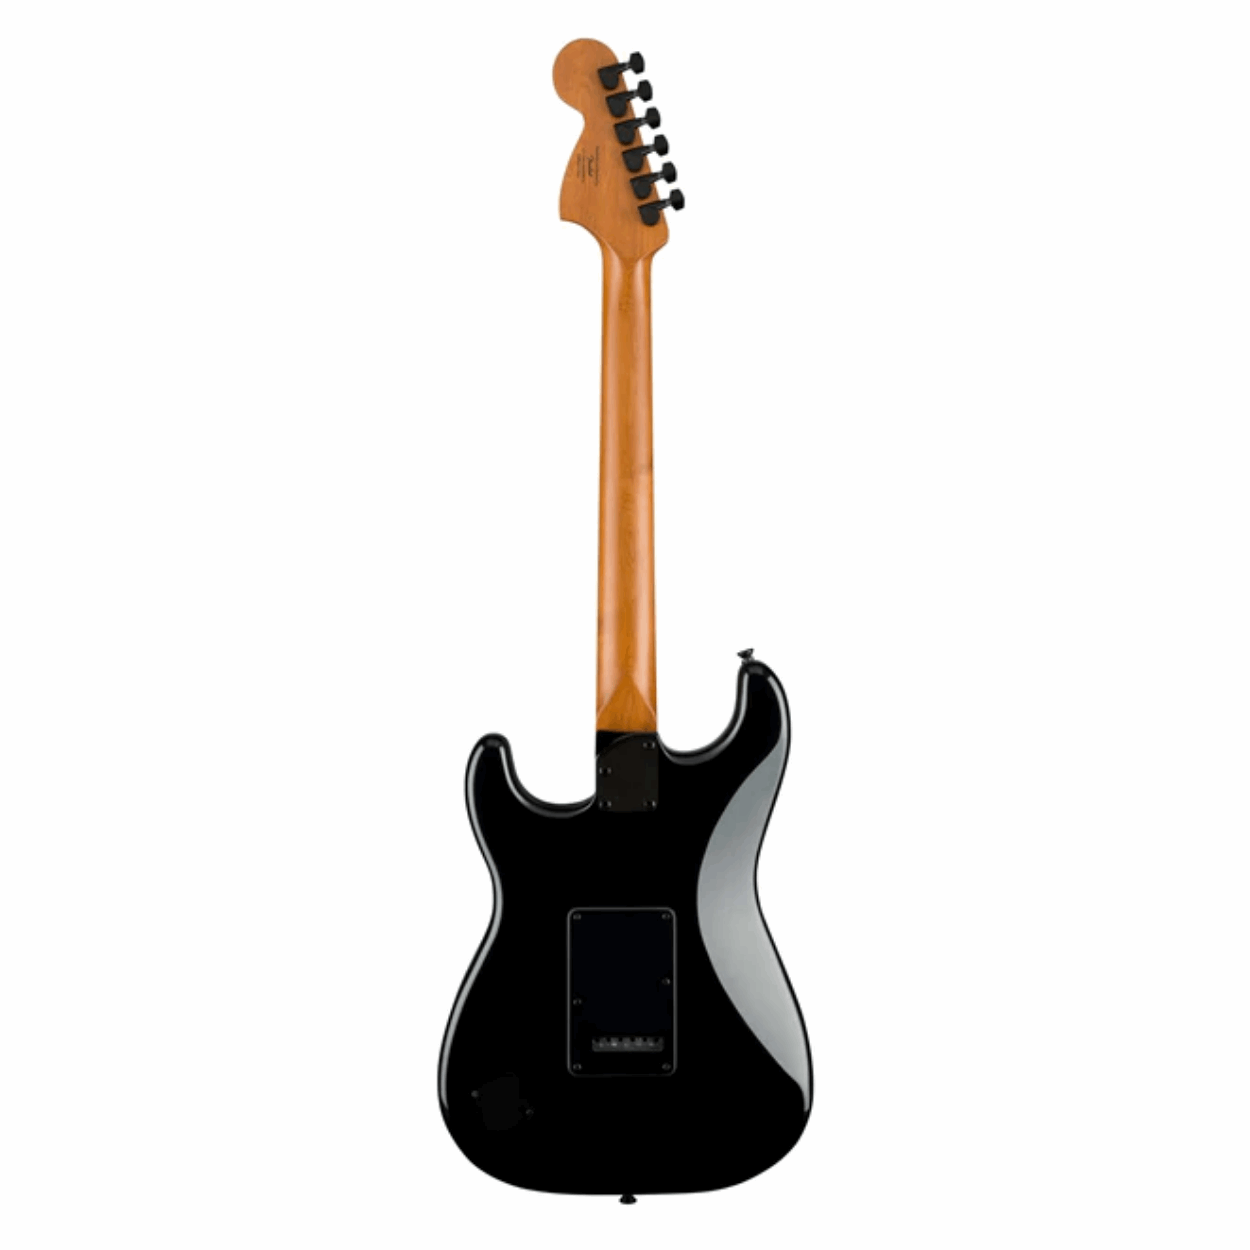 Squier Contemporary Stratocaster Special Electric Guitar, Roasted Maple FB, Black